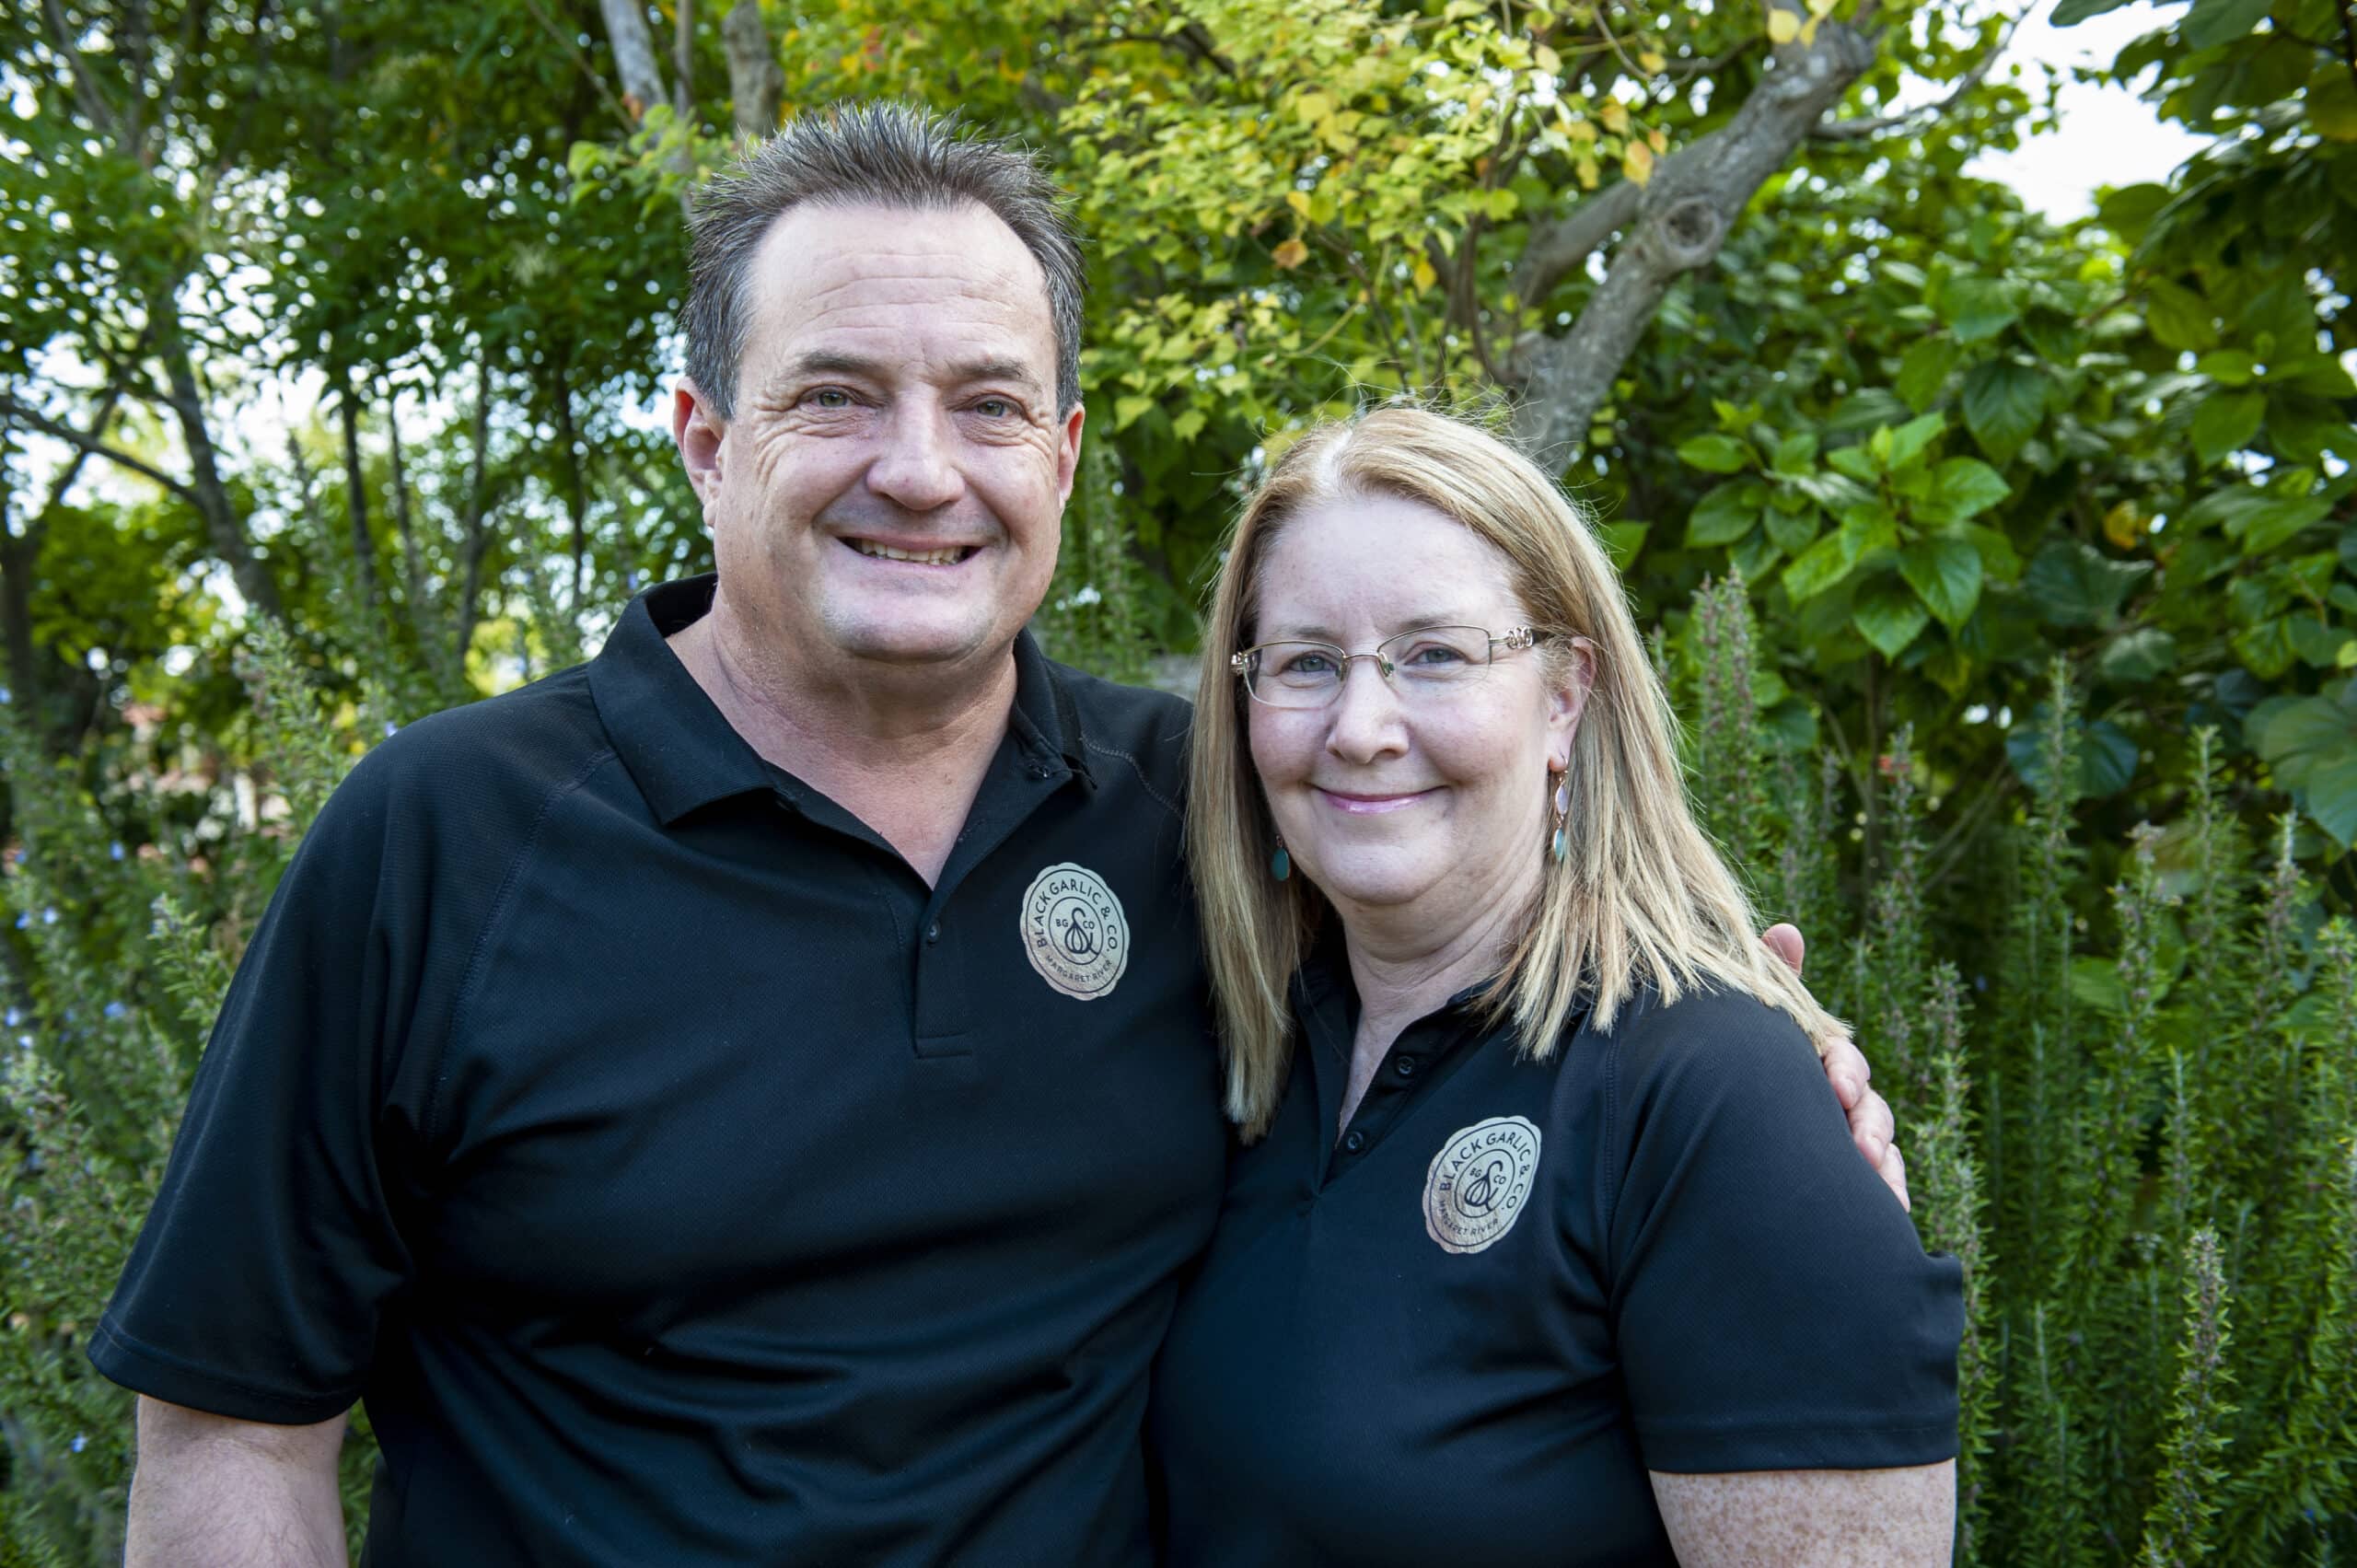 Owners of Black Garlic & Co - Dionne and Julian